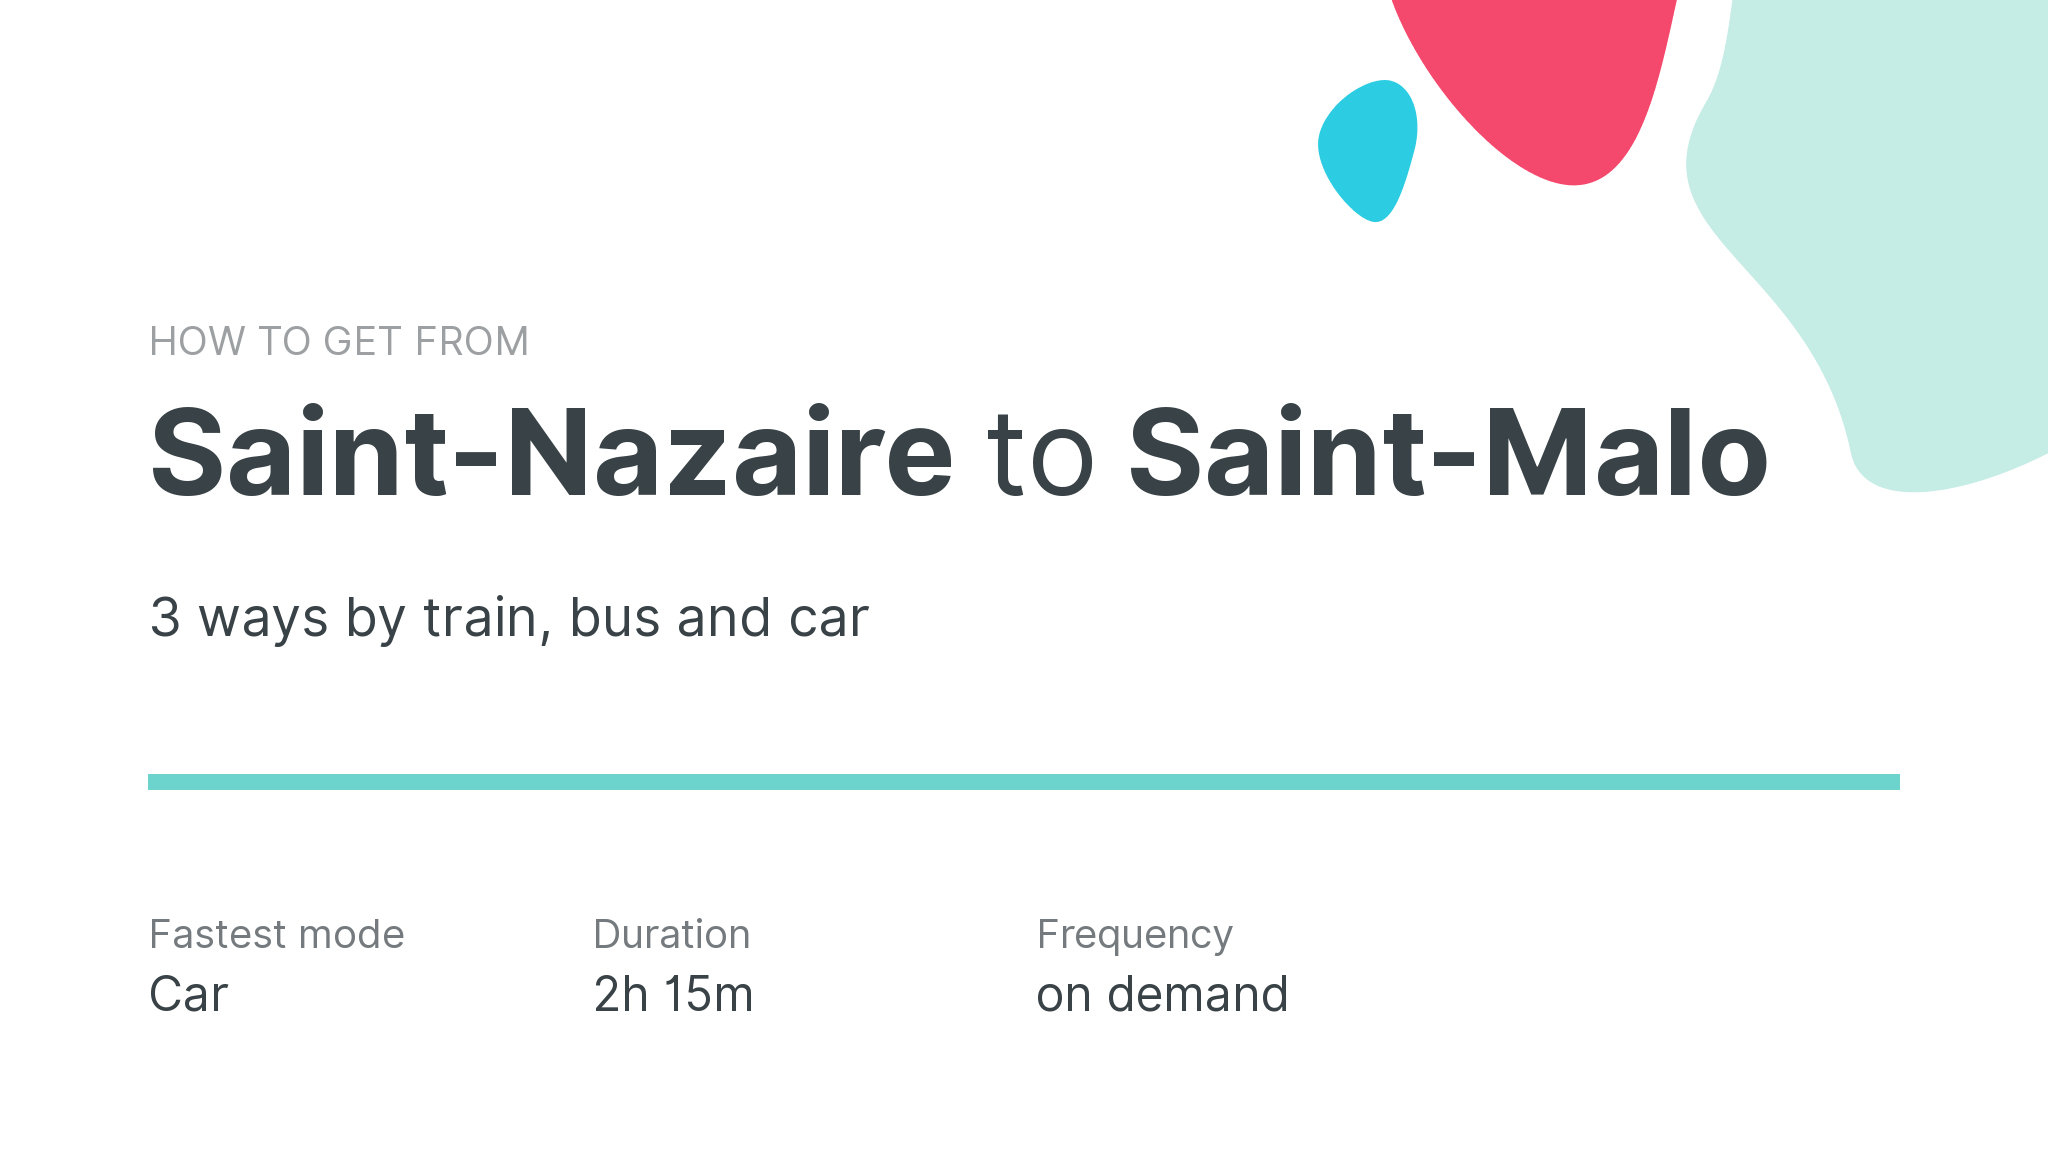 How do I get from Saint-Nazaire to Saint-Malo